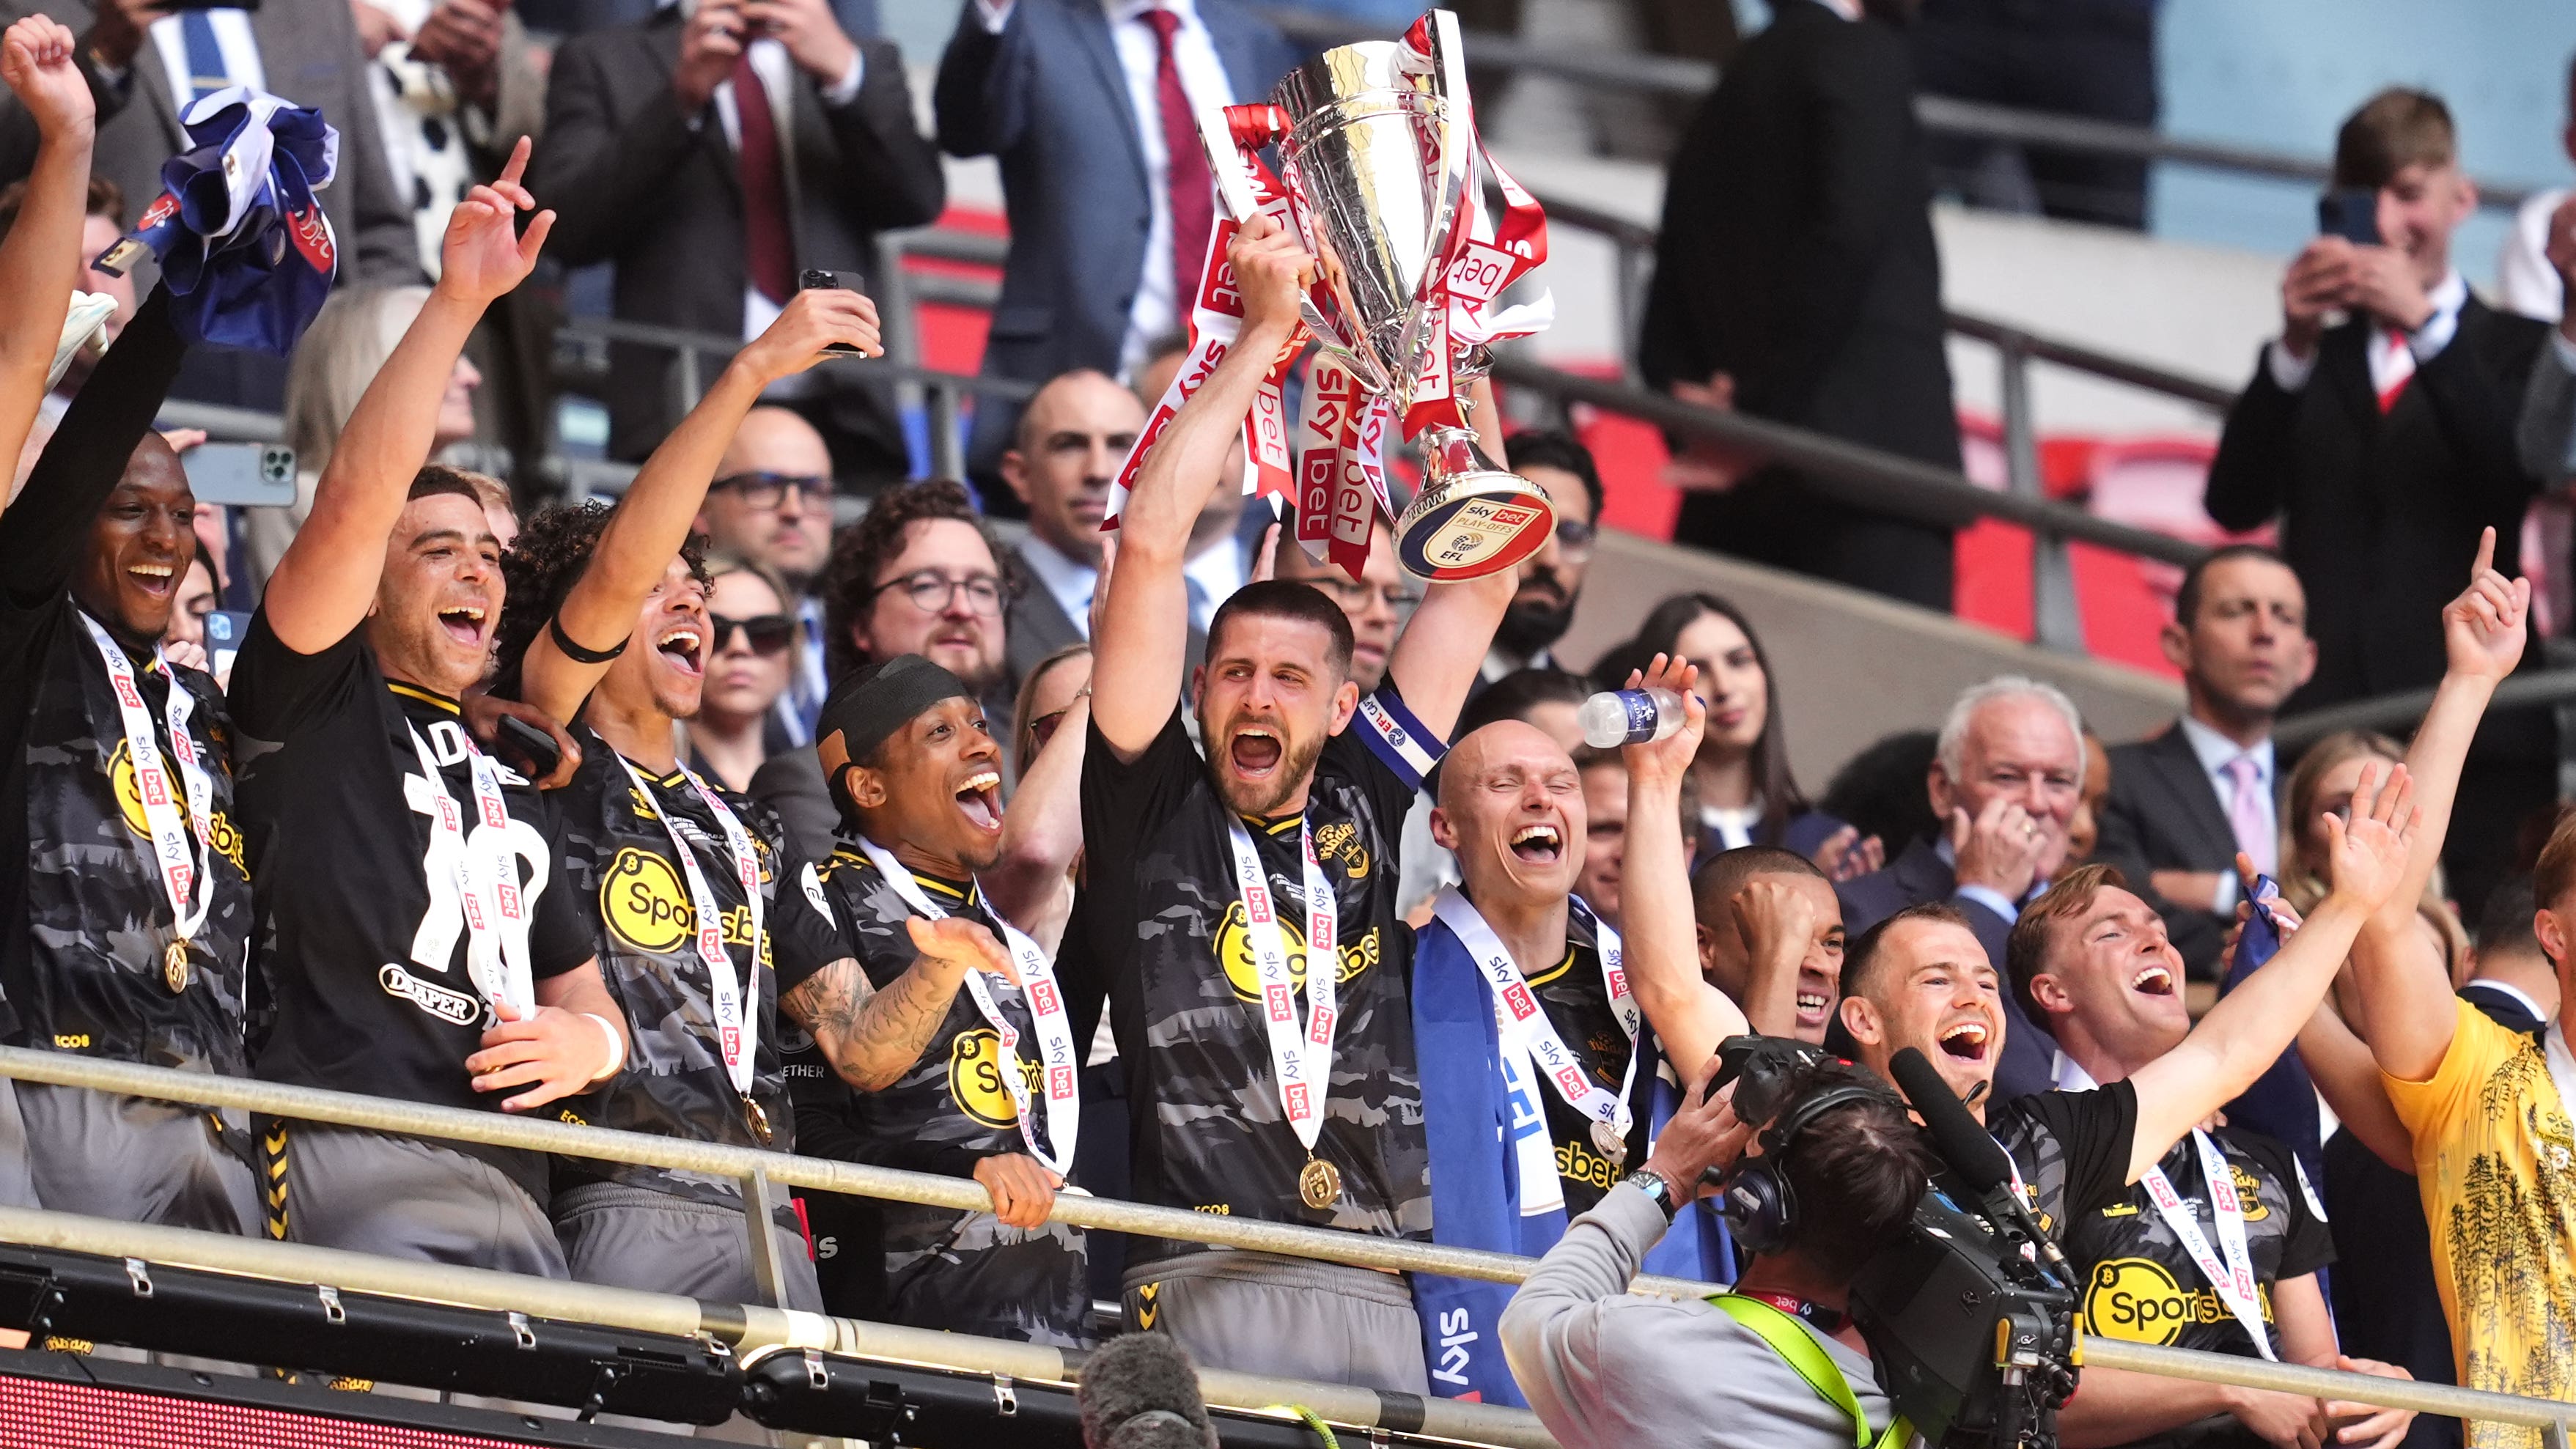 Southampton return to Premier League after beating Leeds in play-off final